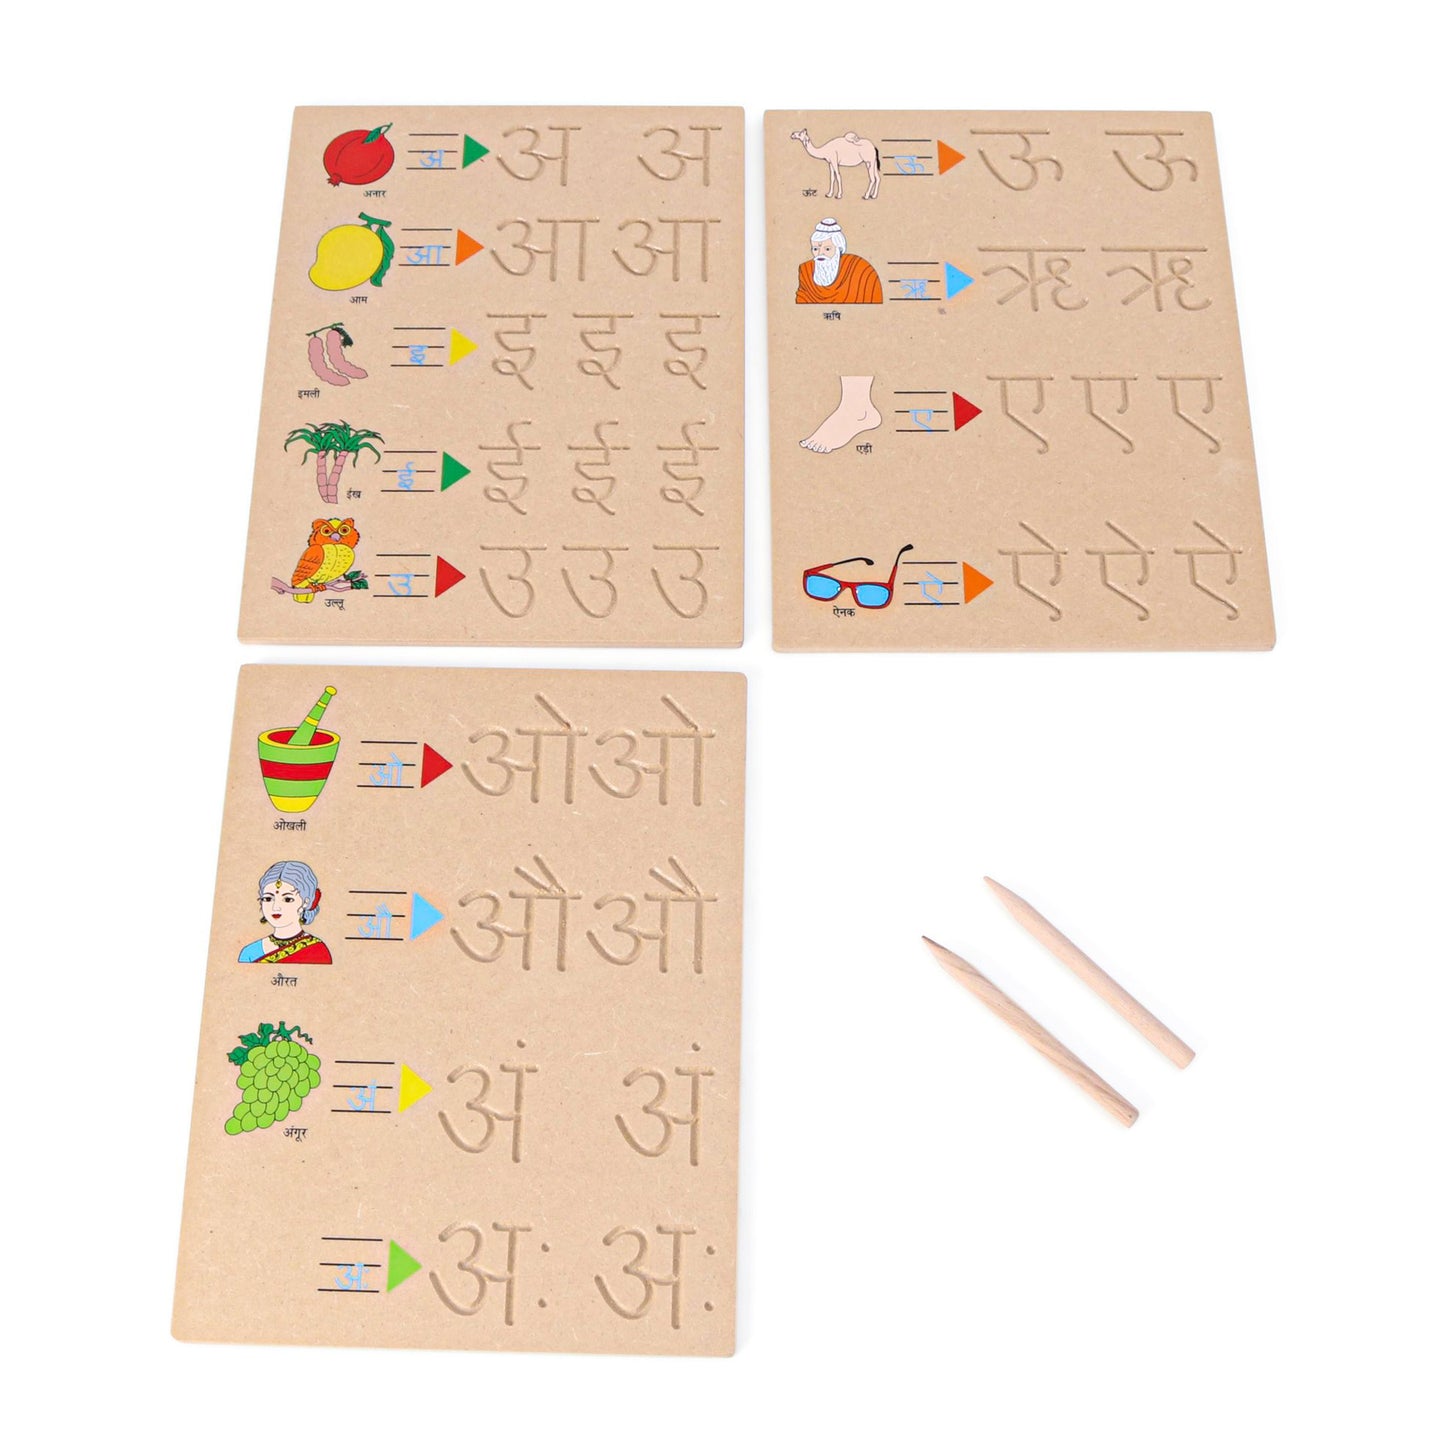 HILIFE Wooden Hindi Vowels With Objects Tracing Board With Dummy Pencil Pack of 5 - Brown